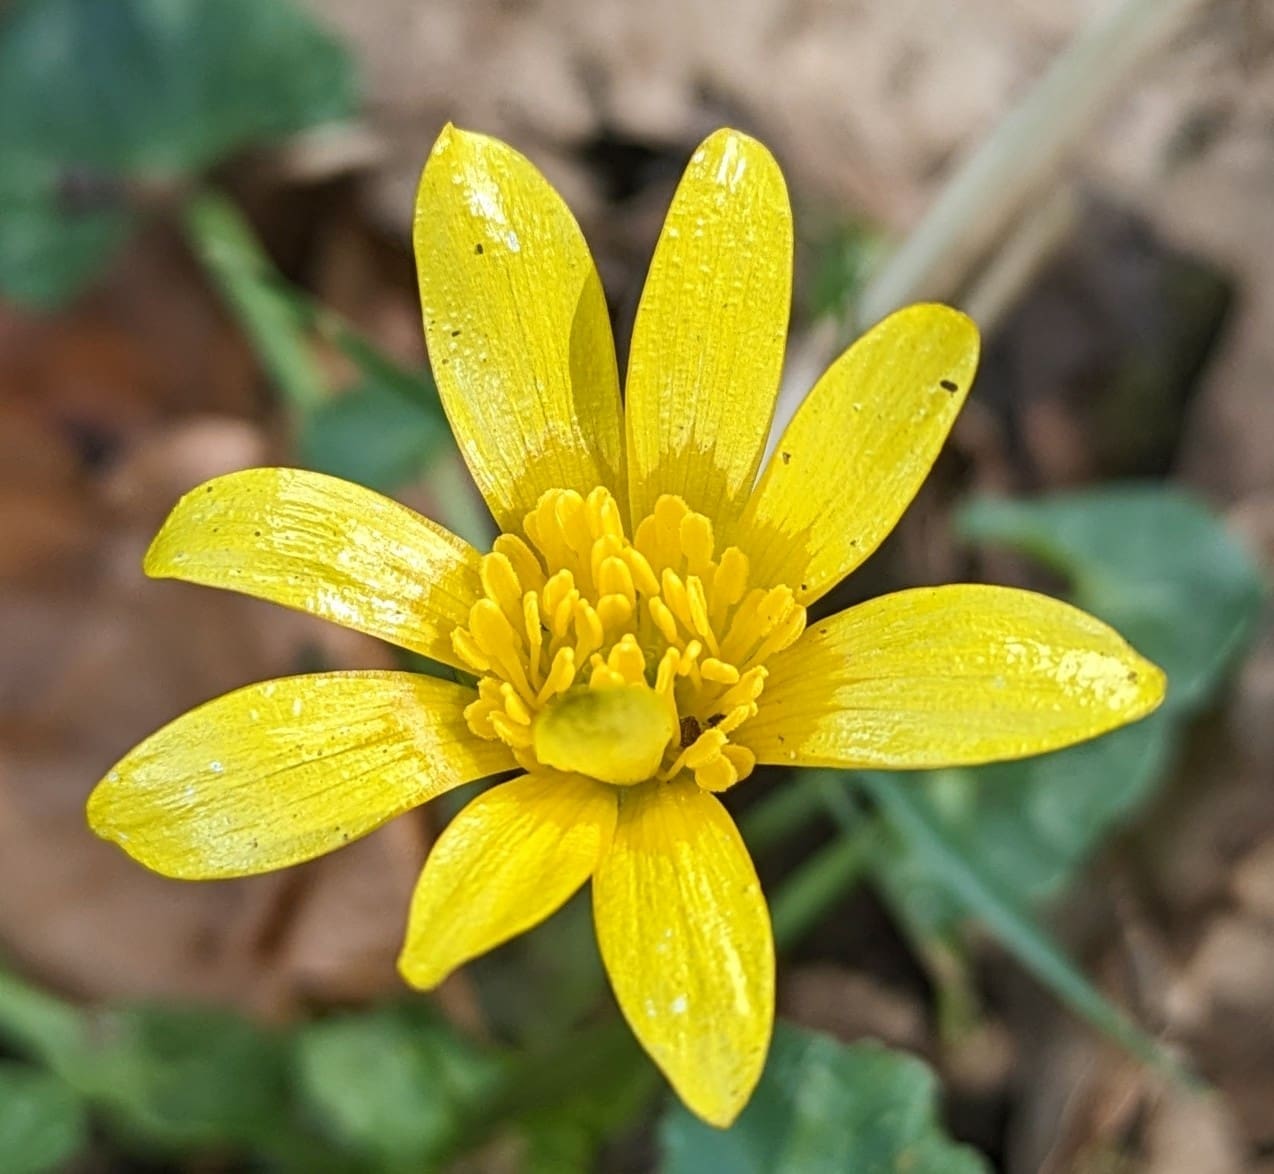 A Glimpse of Renewal and Transition - Februarys Photo Challenge - Celandine